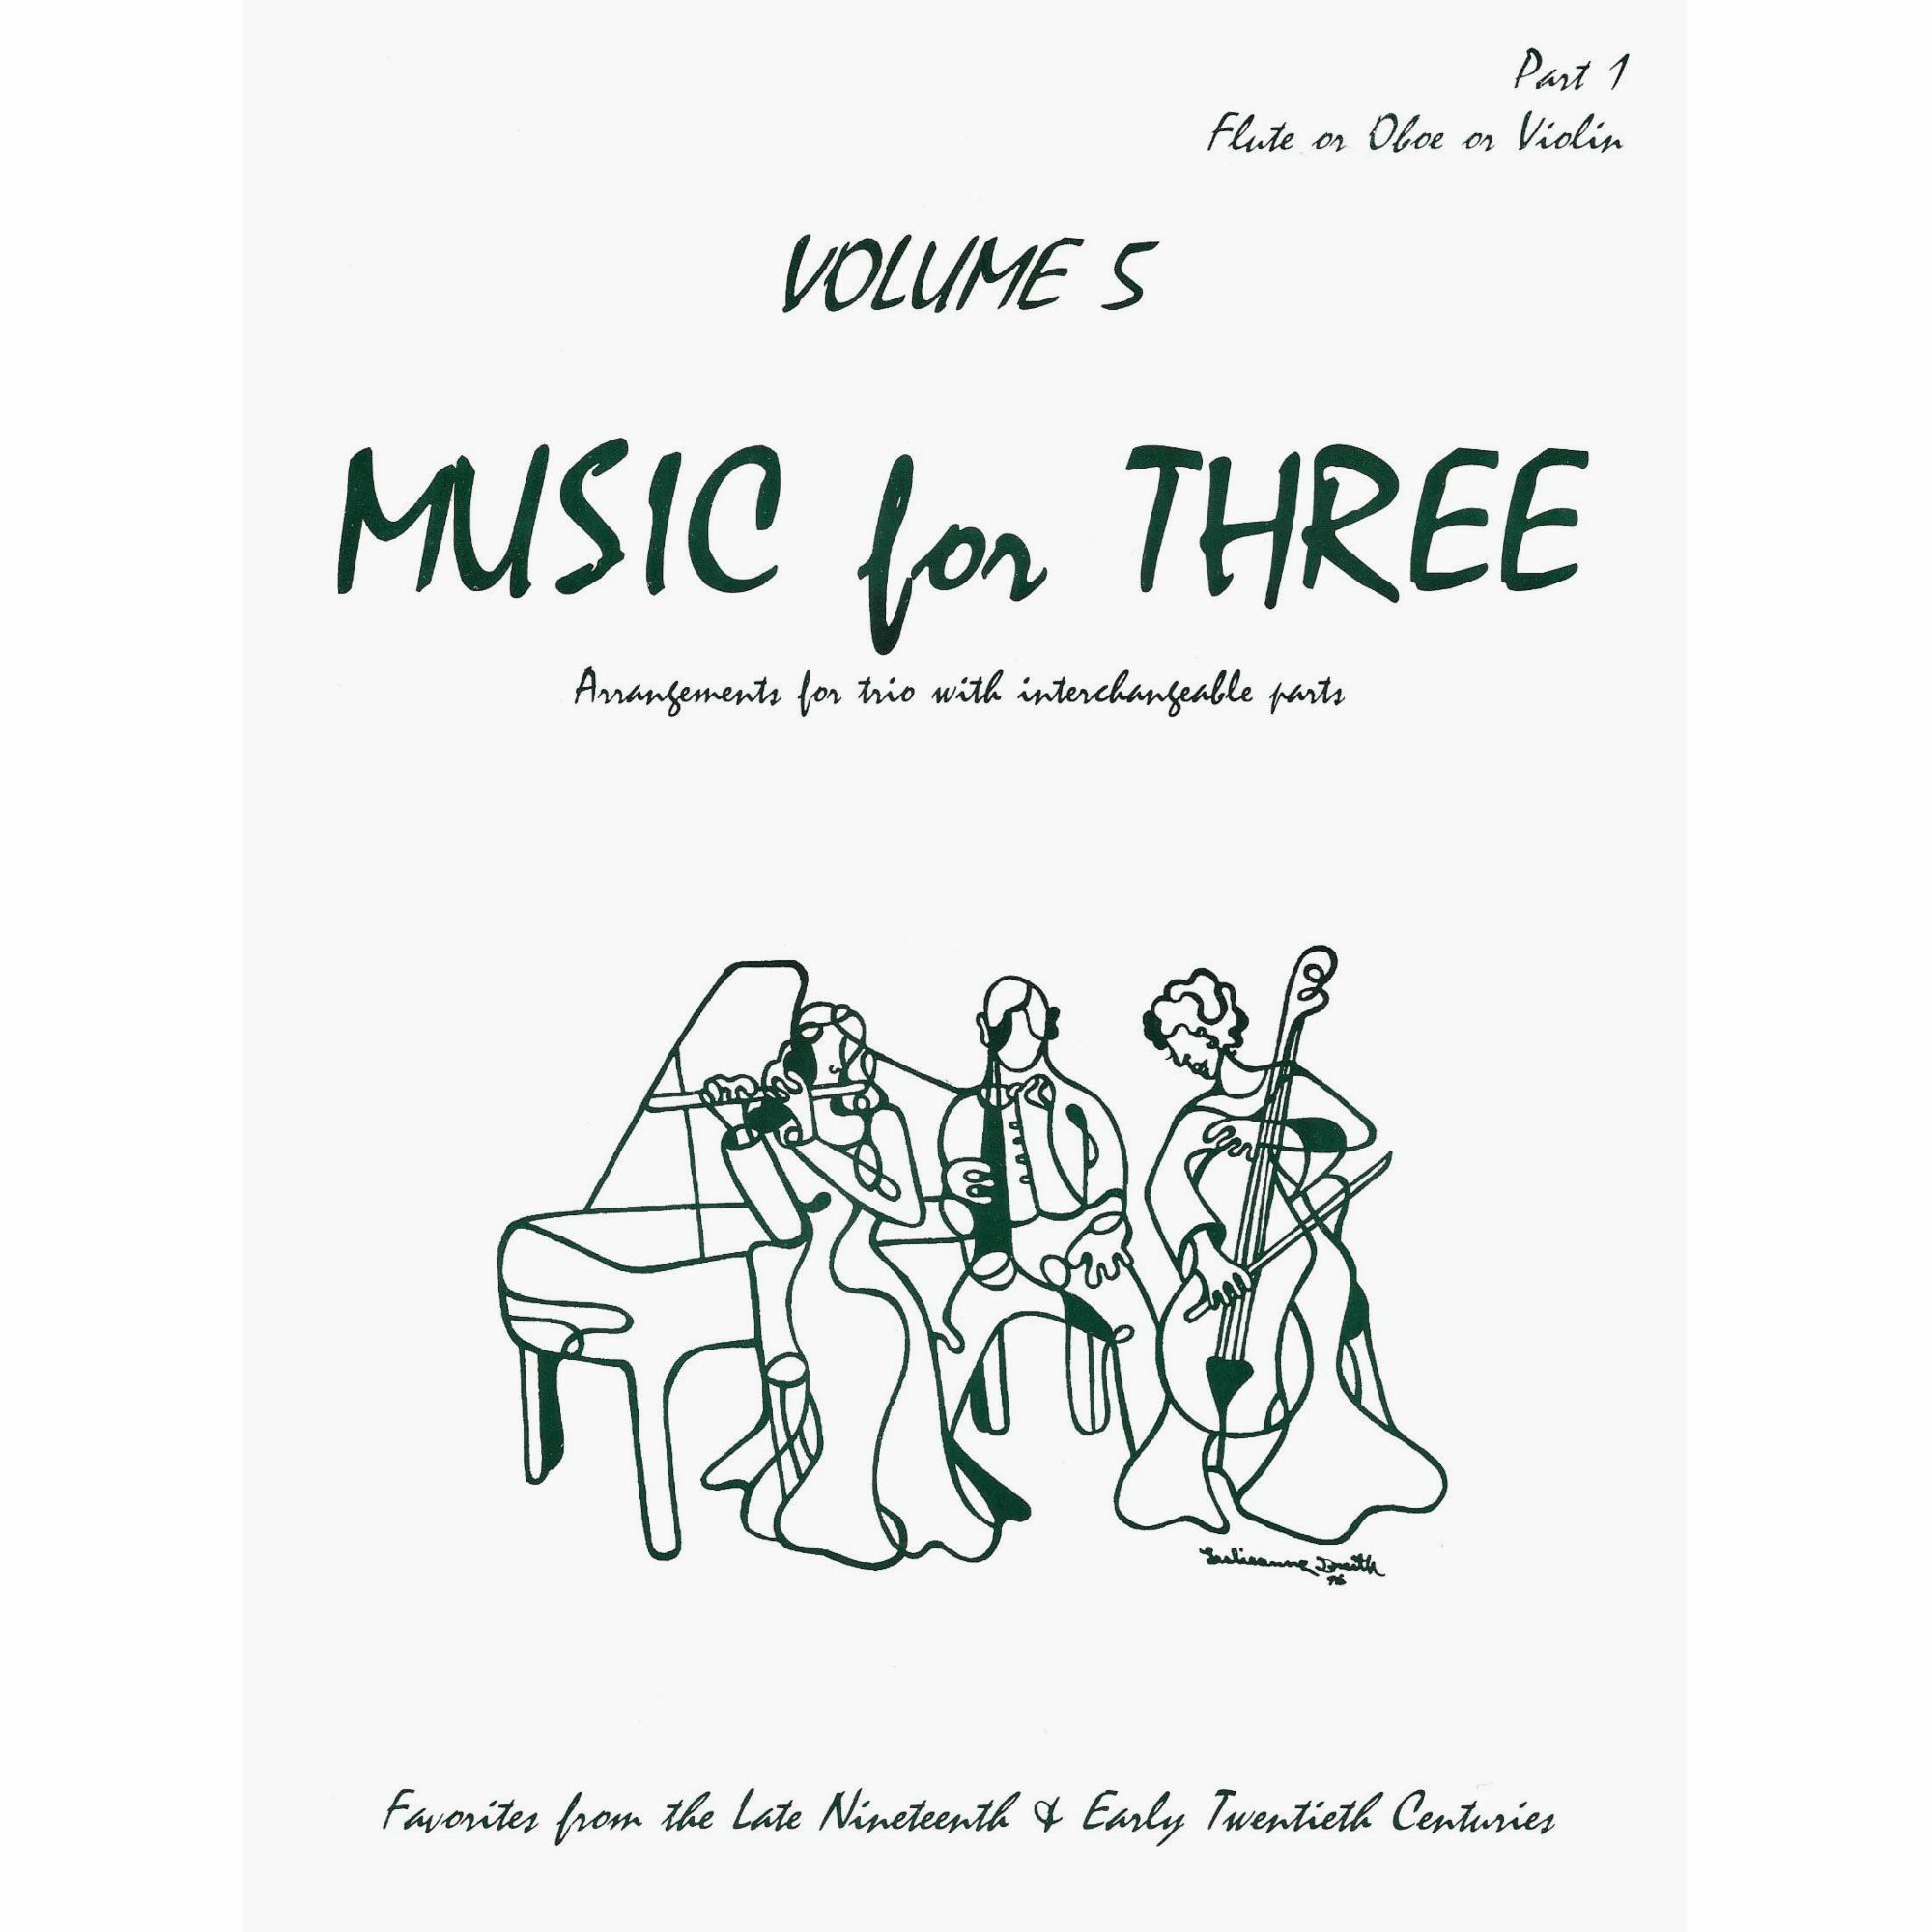 Music for Three, Volume 5: Favorites from the Late 19th and Early 20th Centuries